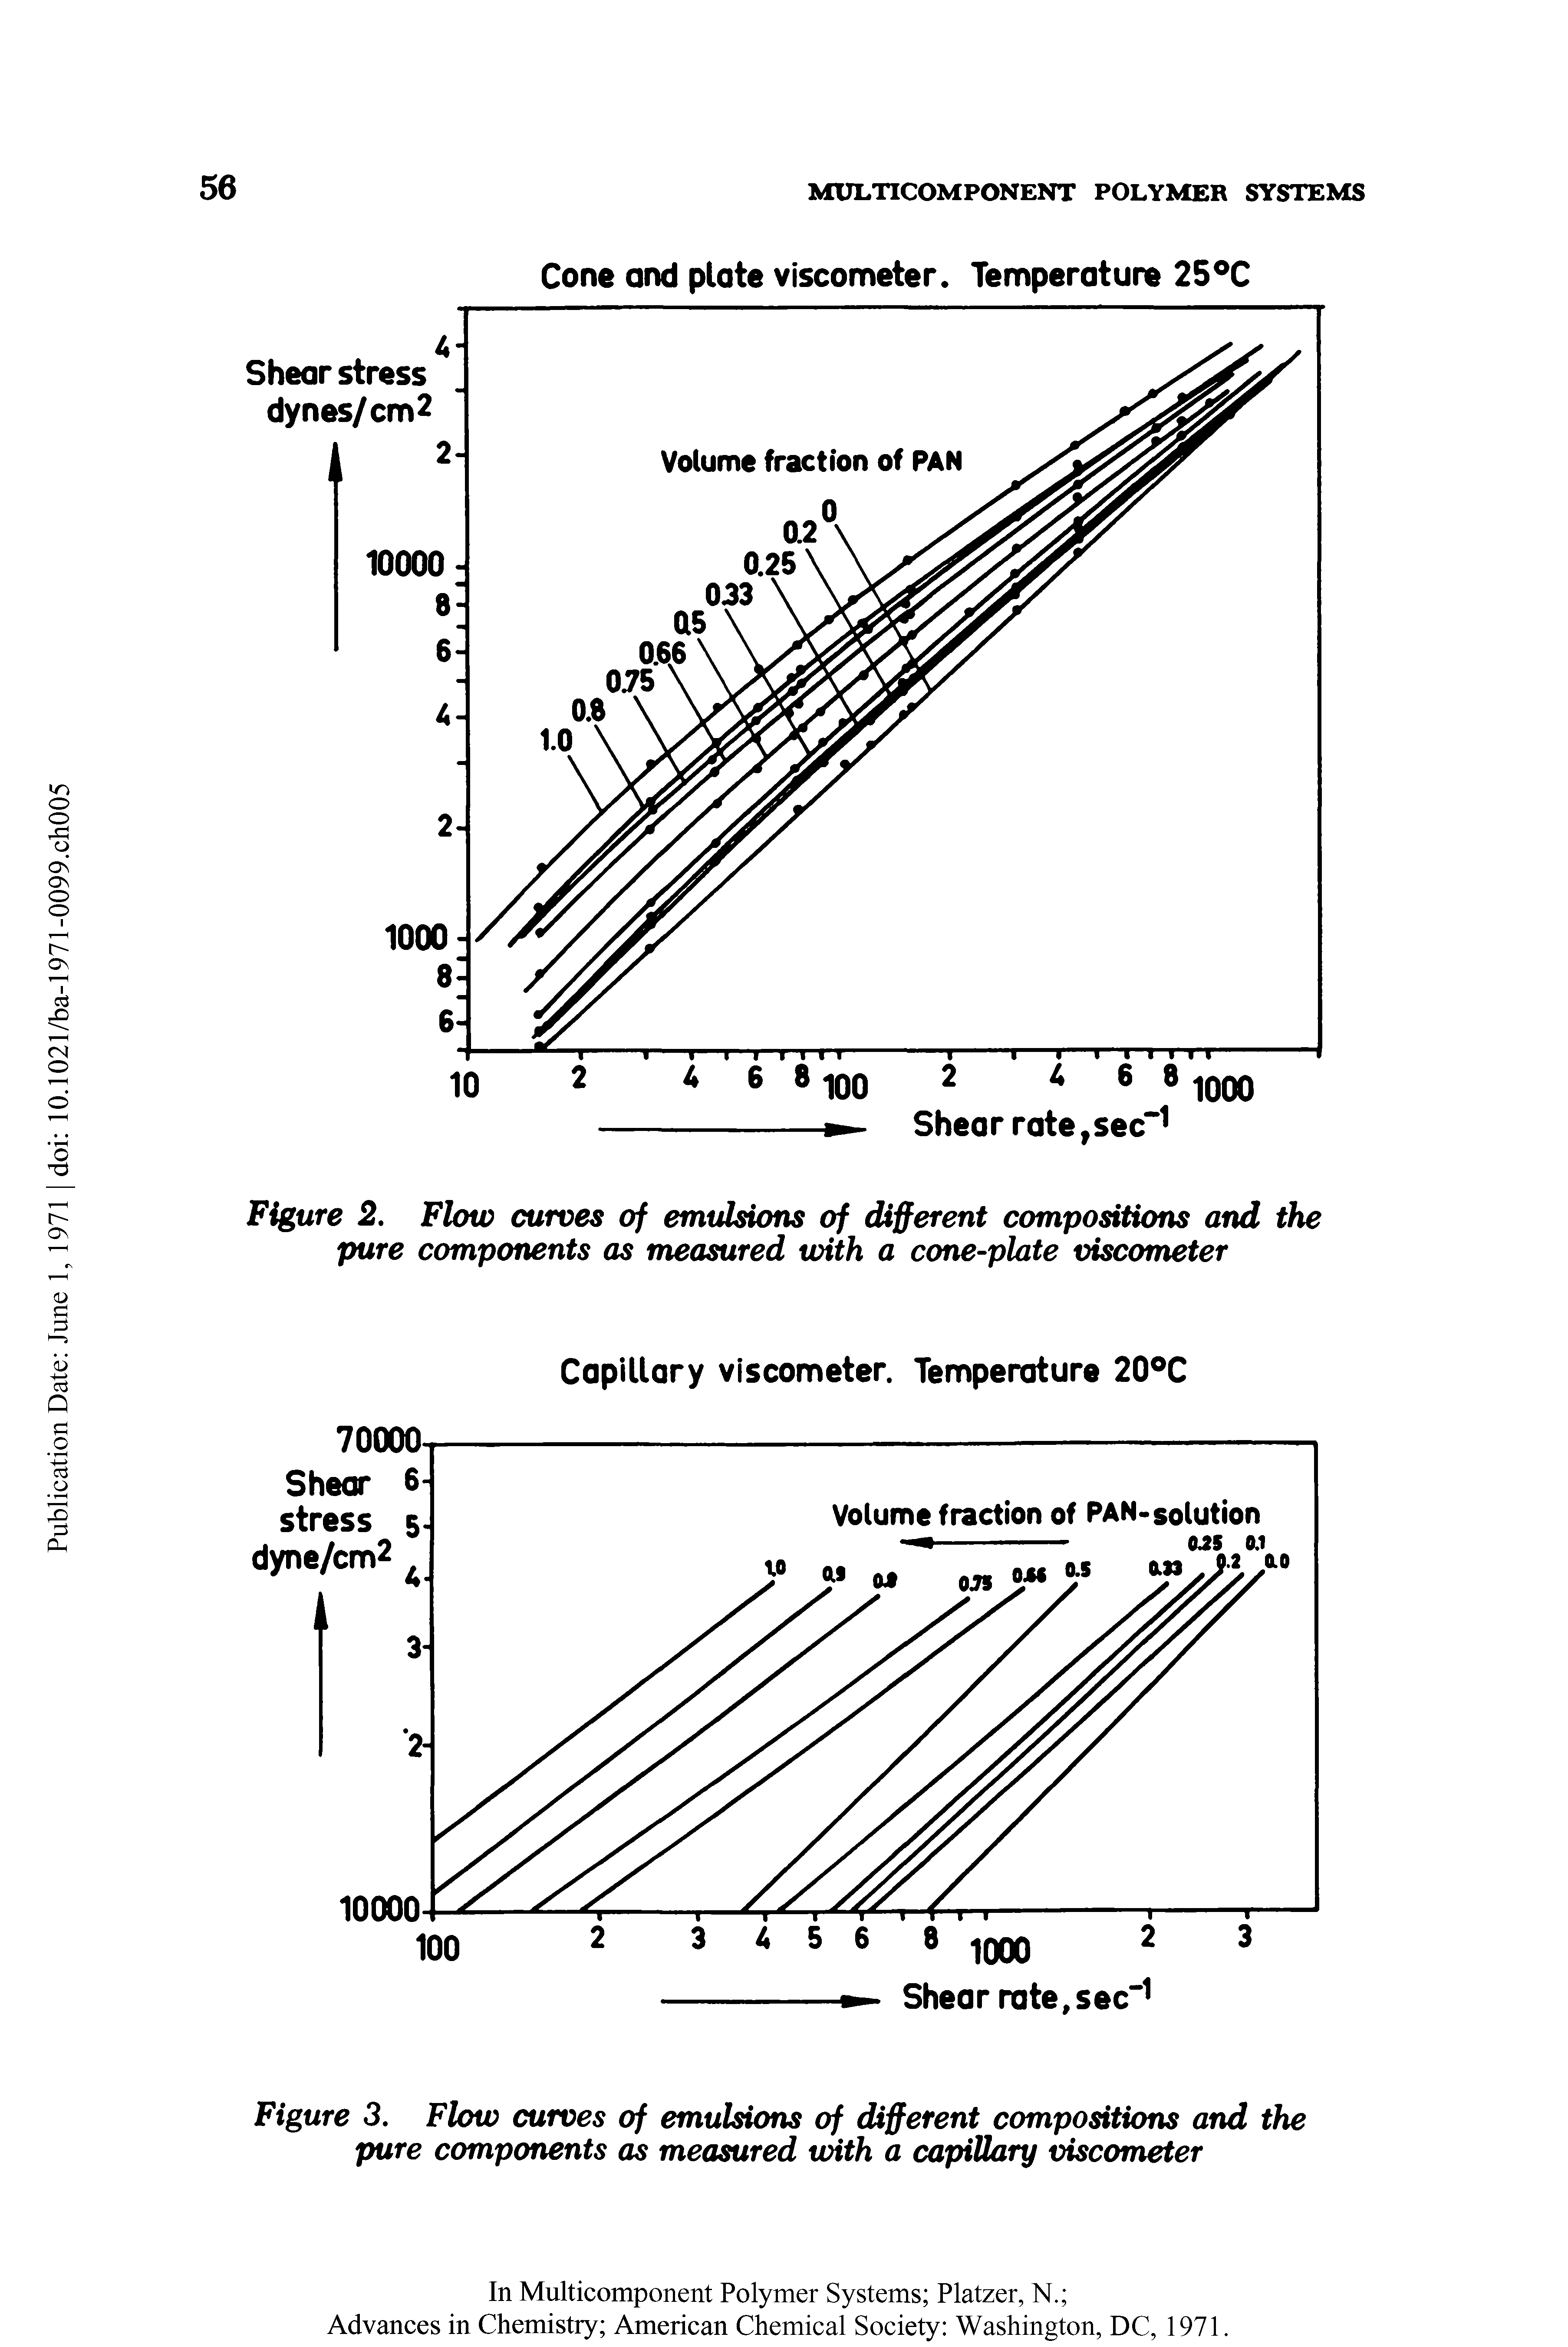 Figure 2. Flow curves of emulsions of different compositions and the pure components as measured with a cone-plate viscometer...